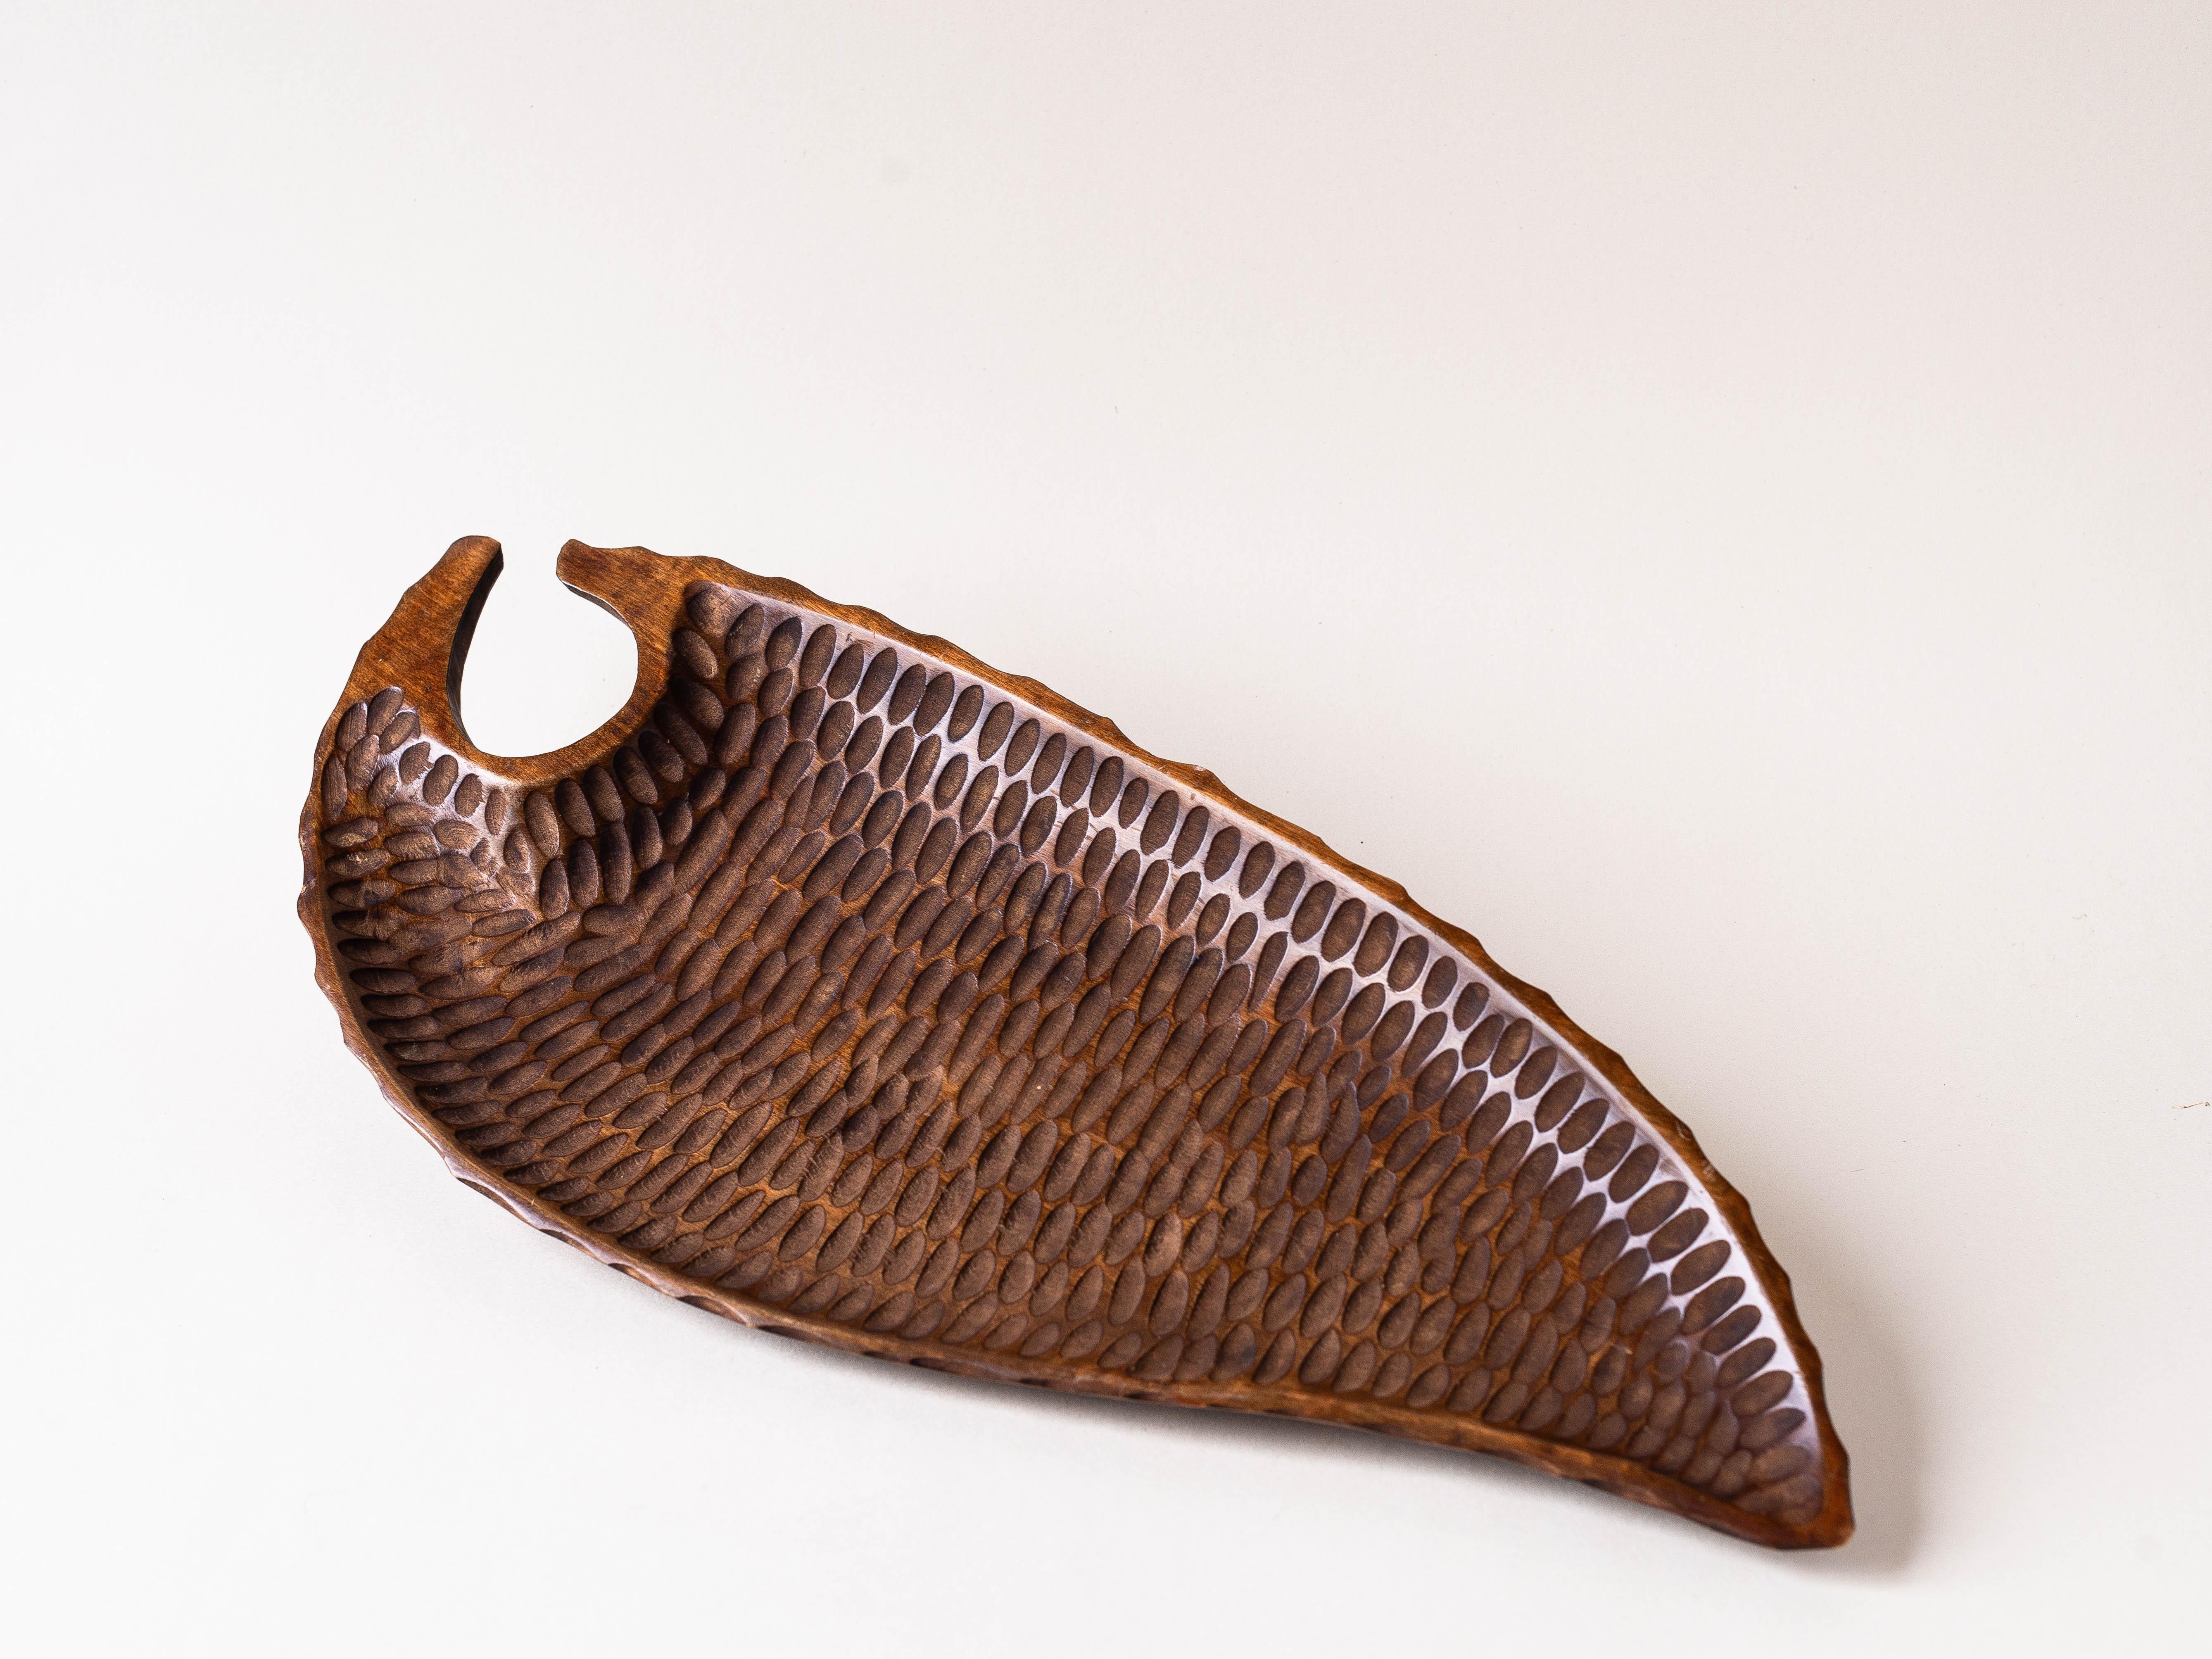 Danish Teak Wood Dish or Fruit Basket, 1970s.

Leaf shape and beautiful gouged wood work.

In very good condition !